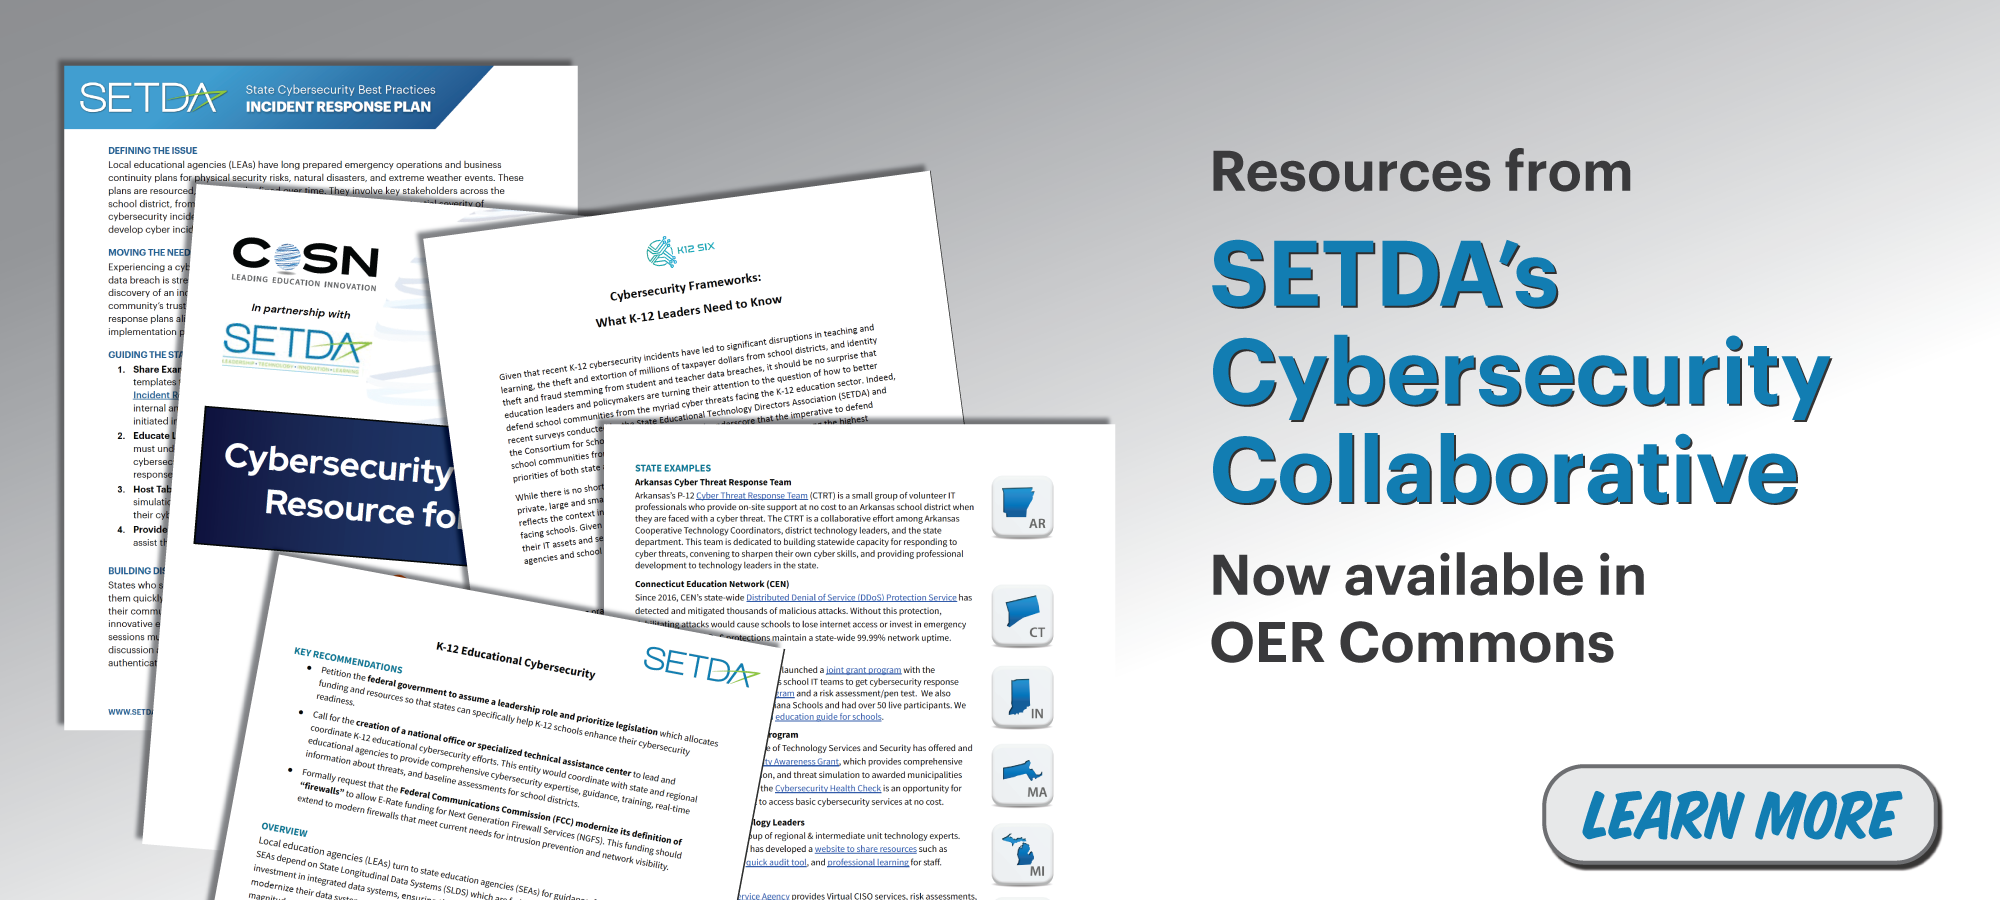 SETDA's Cybersecurity Collaborative Resources in OER